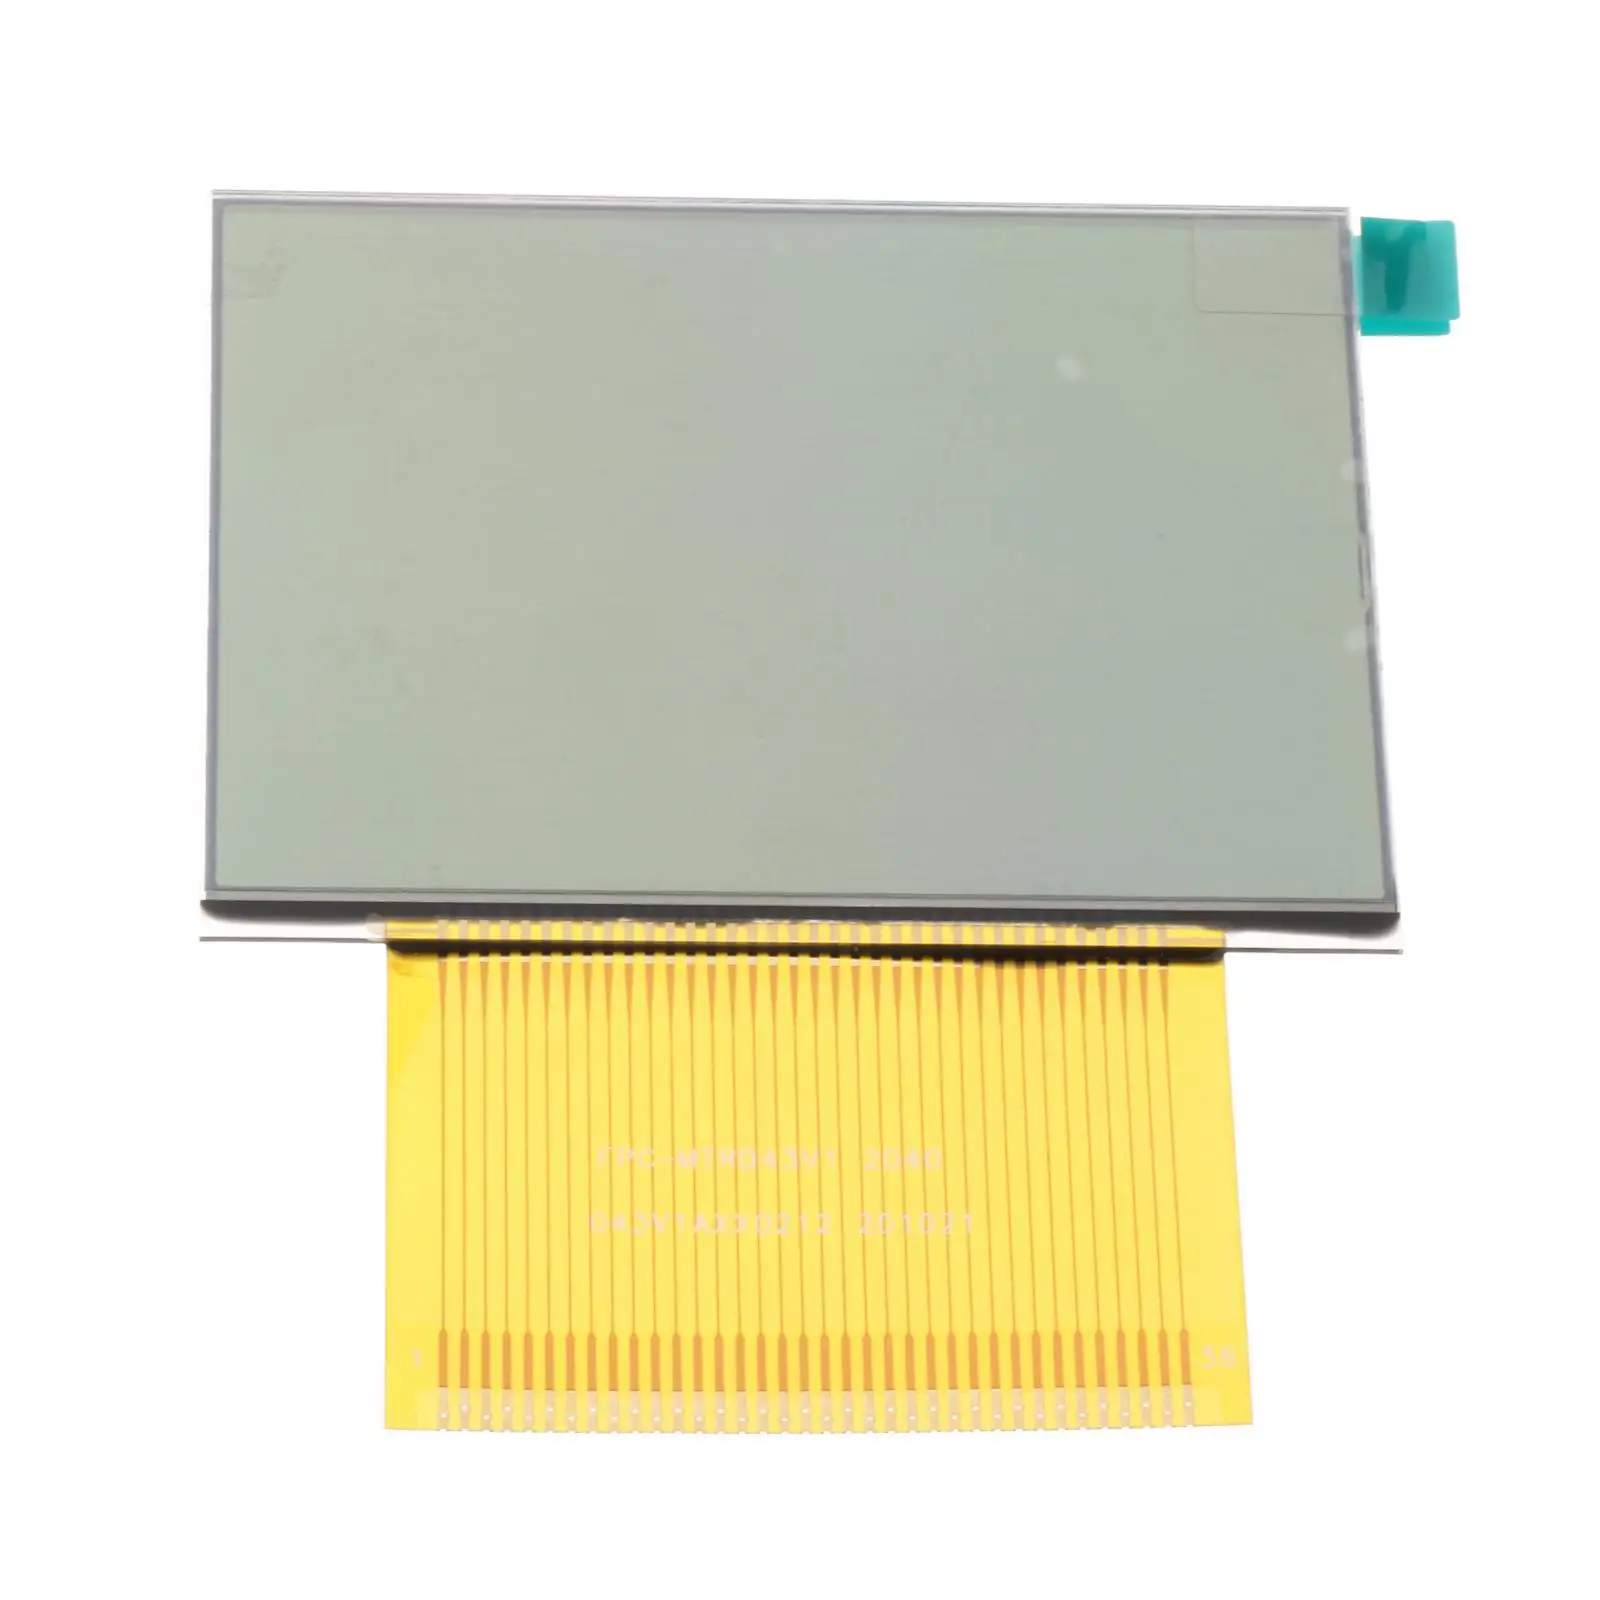 High Performance LCD Display Replace Repair Accessories Spare Parts for 6320SE 6620 84120 6220